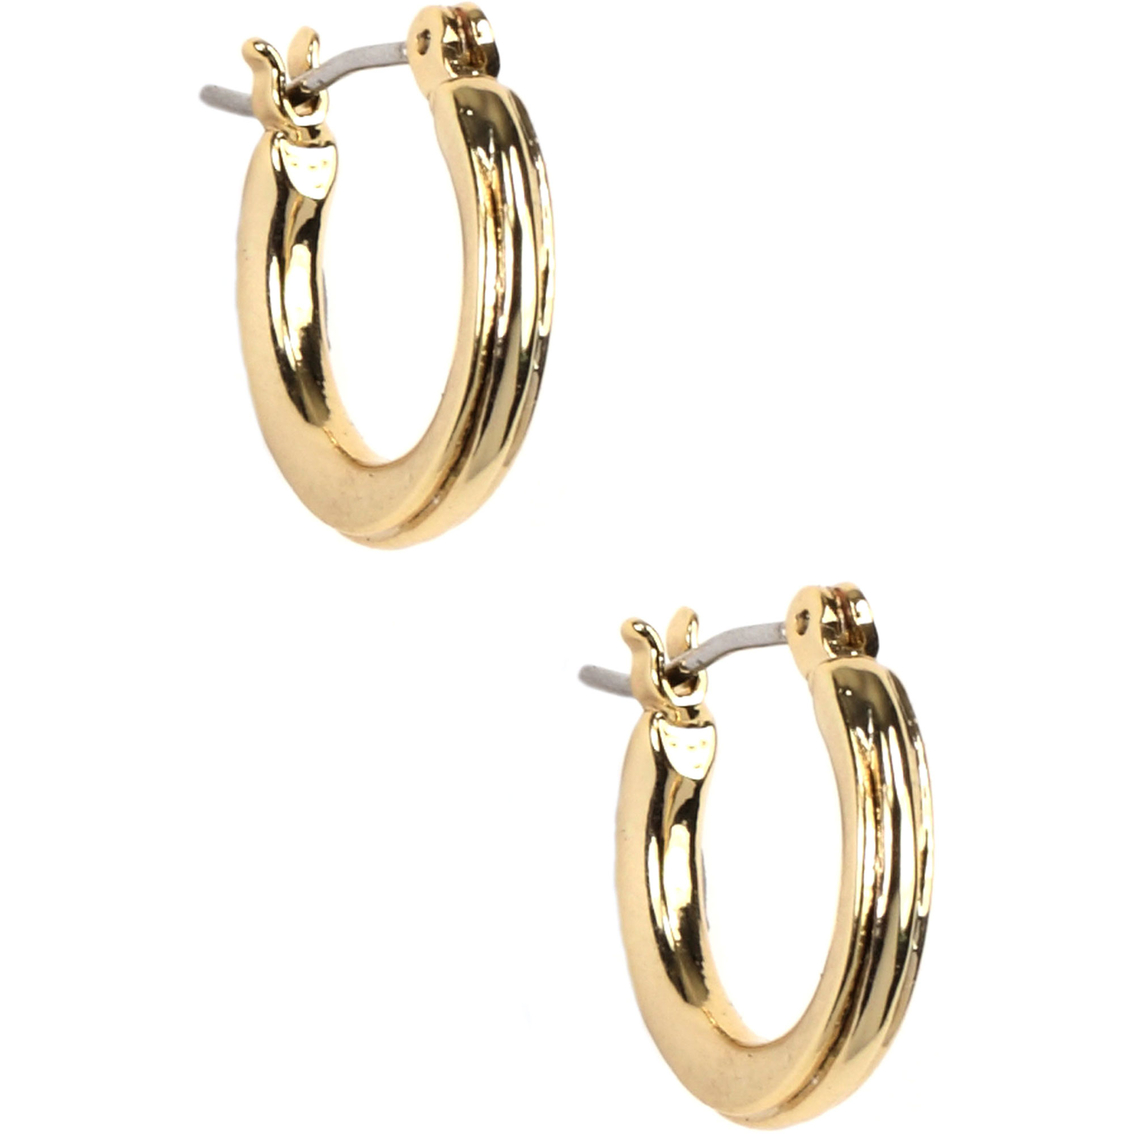 Napier Polished Goldtone Hoop With Textured Design Earrings | Fashion ...